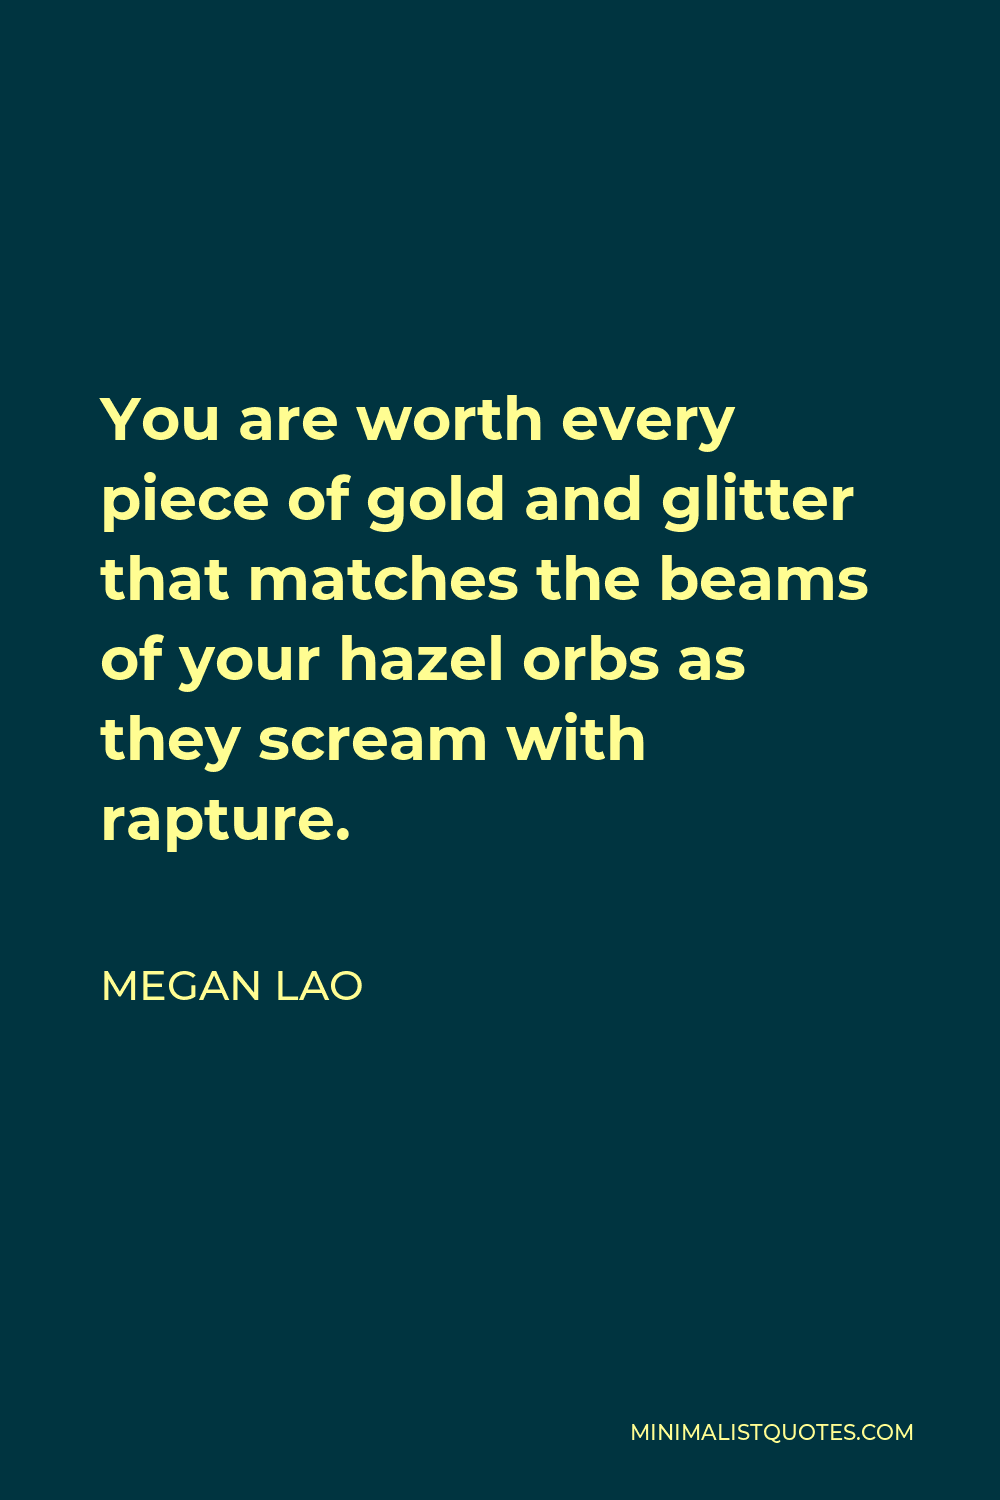 Megan Lao Quote - You are worth every piece of gold and glitter that matches the beams of your hazel orbs as they scream with rapture.